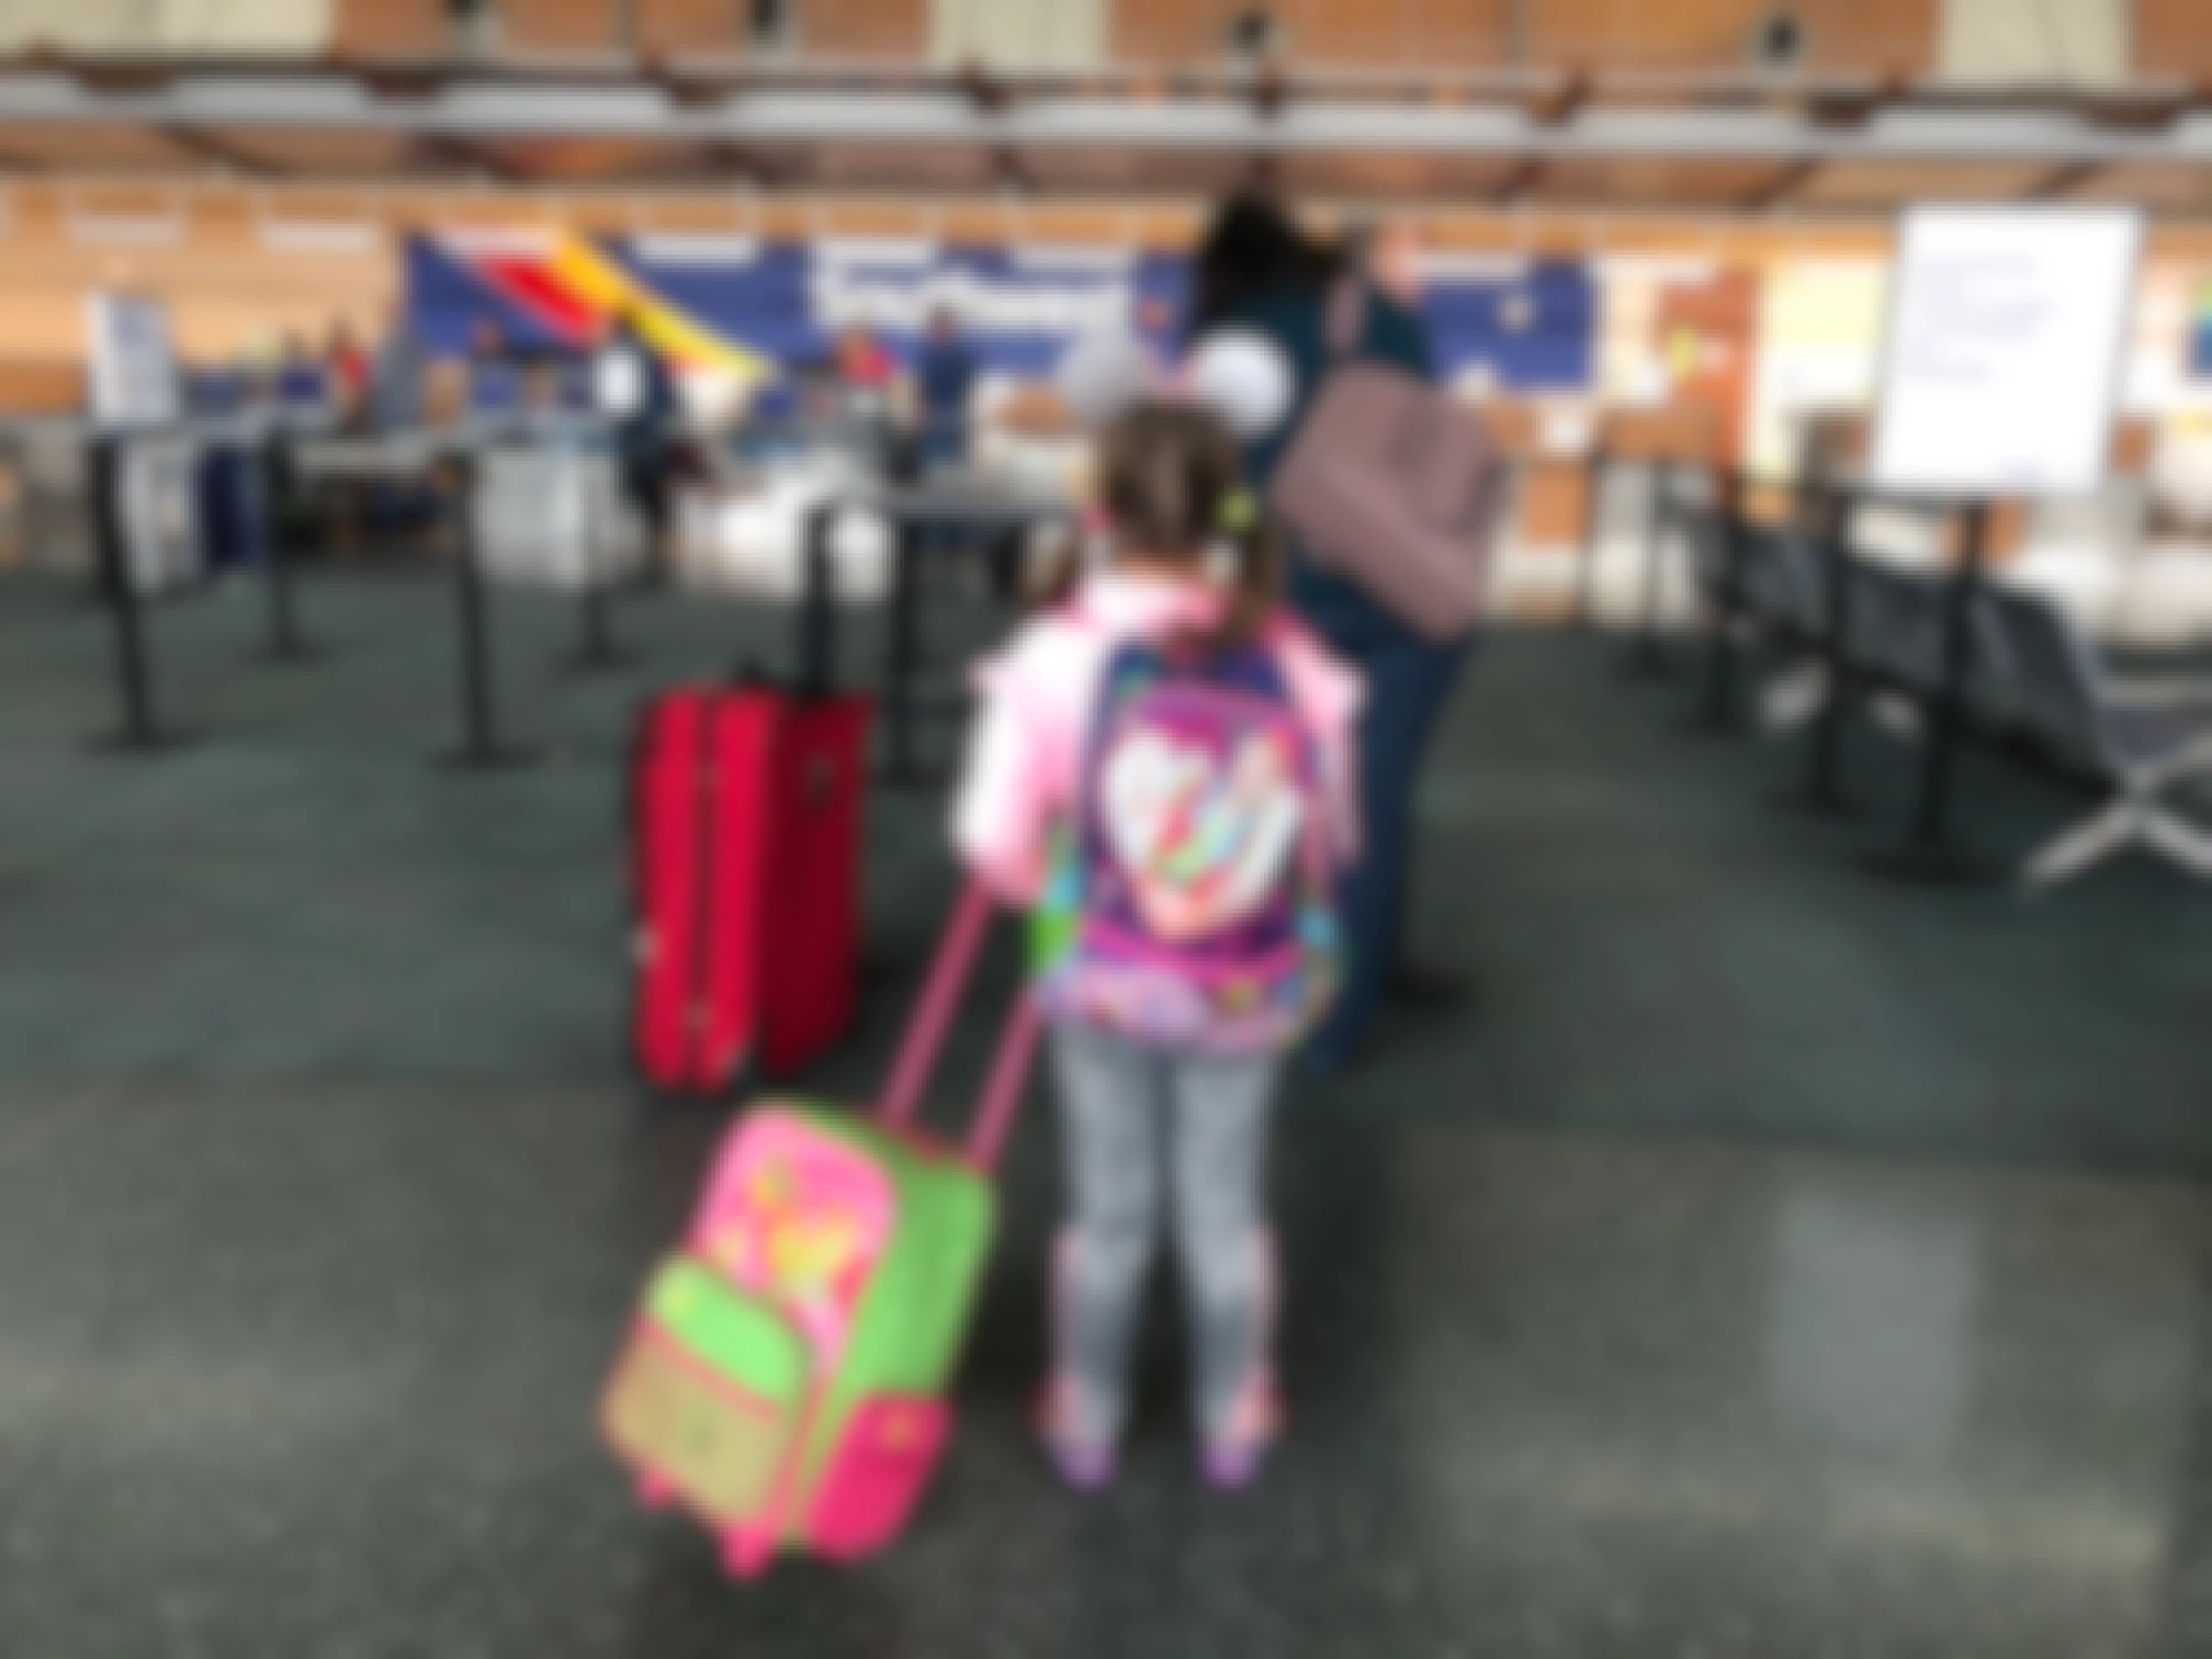 A little girl stands in line with luggage to go to Disneyland.